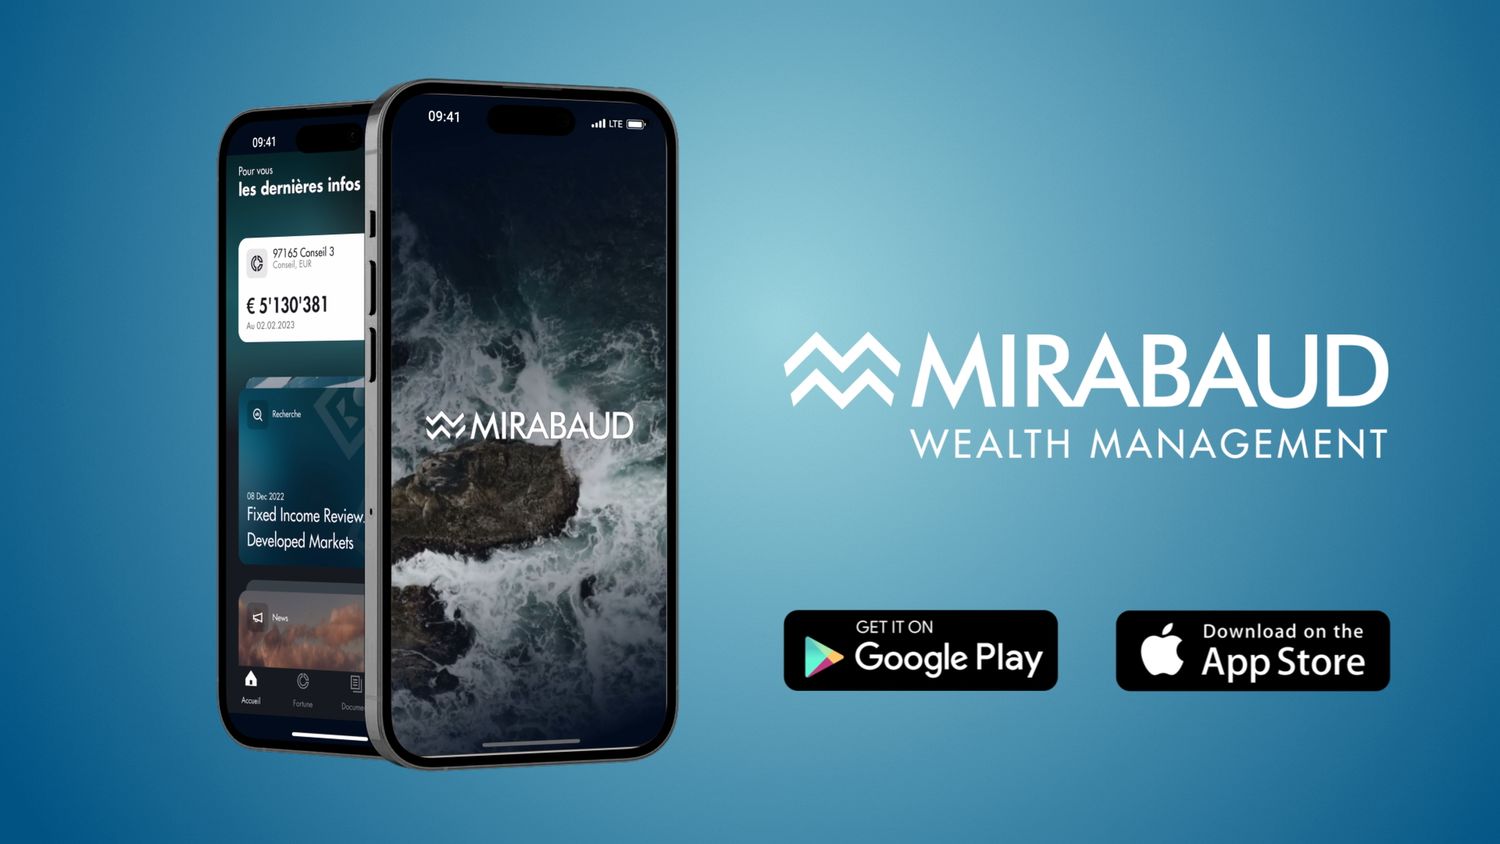 Mirabaud Wealth Management Mobile App is out!